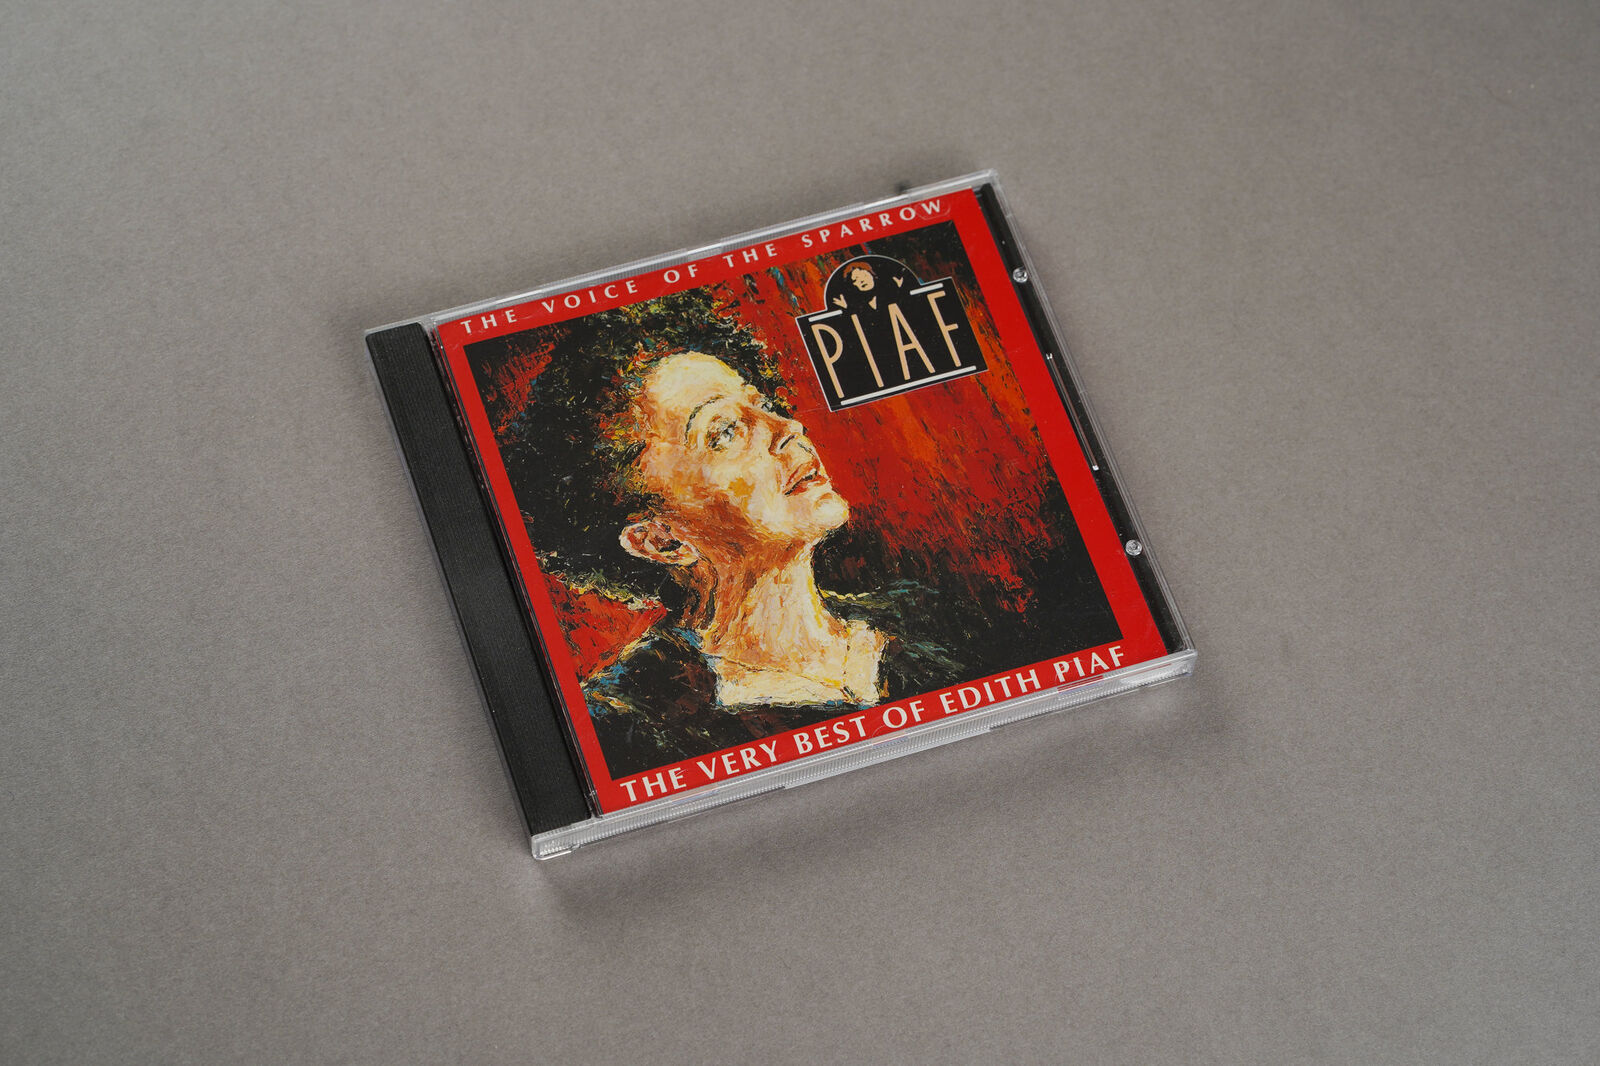 The Voice of the Sparrow: The Very Best of Edith Piaf - 1991 Original CD Compac